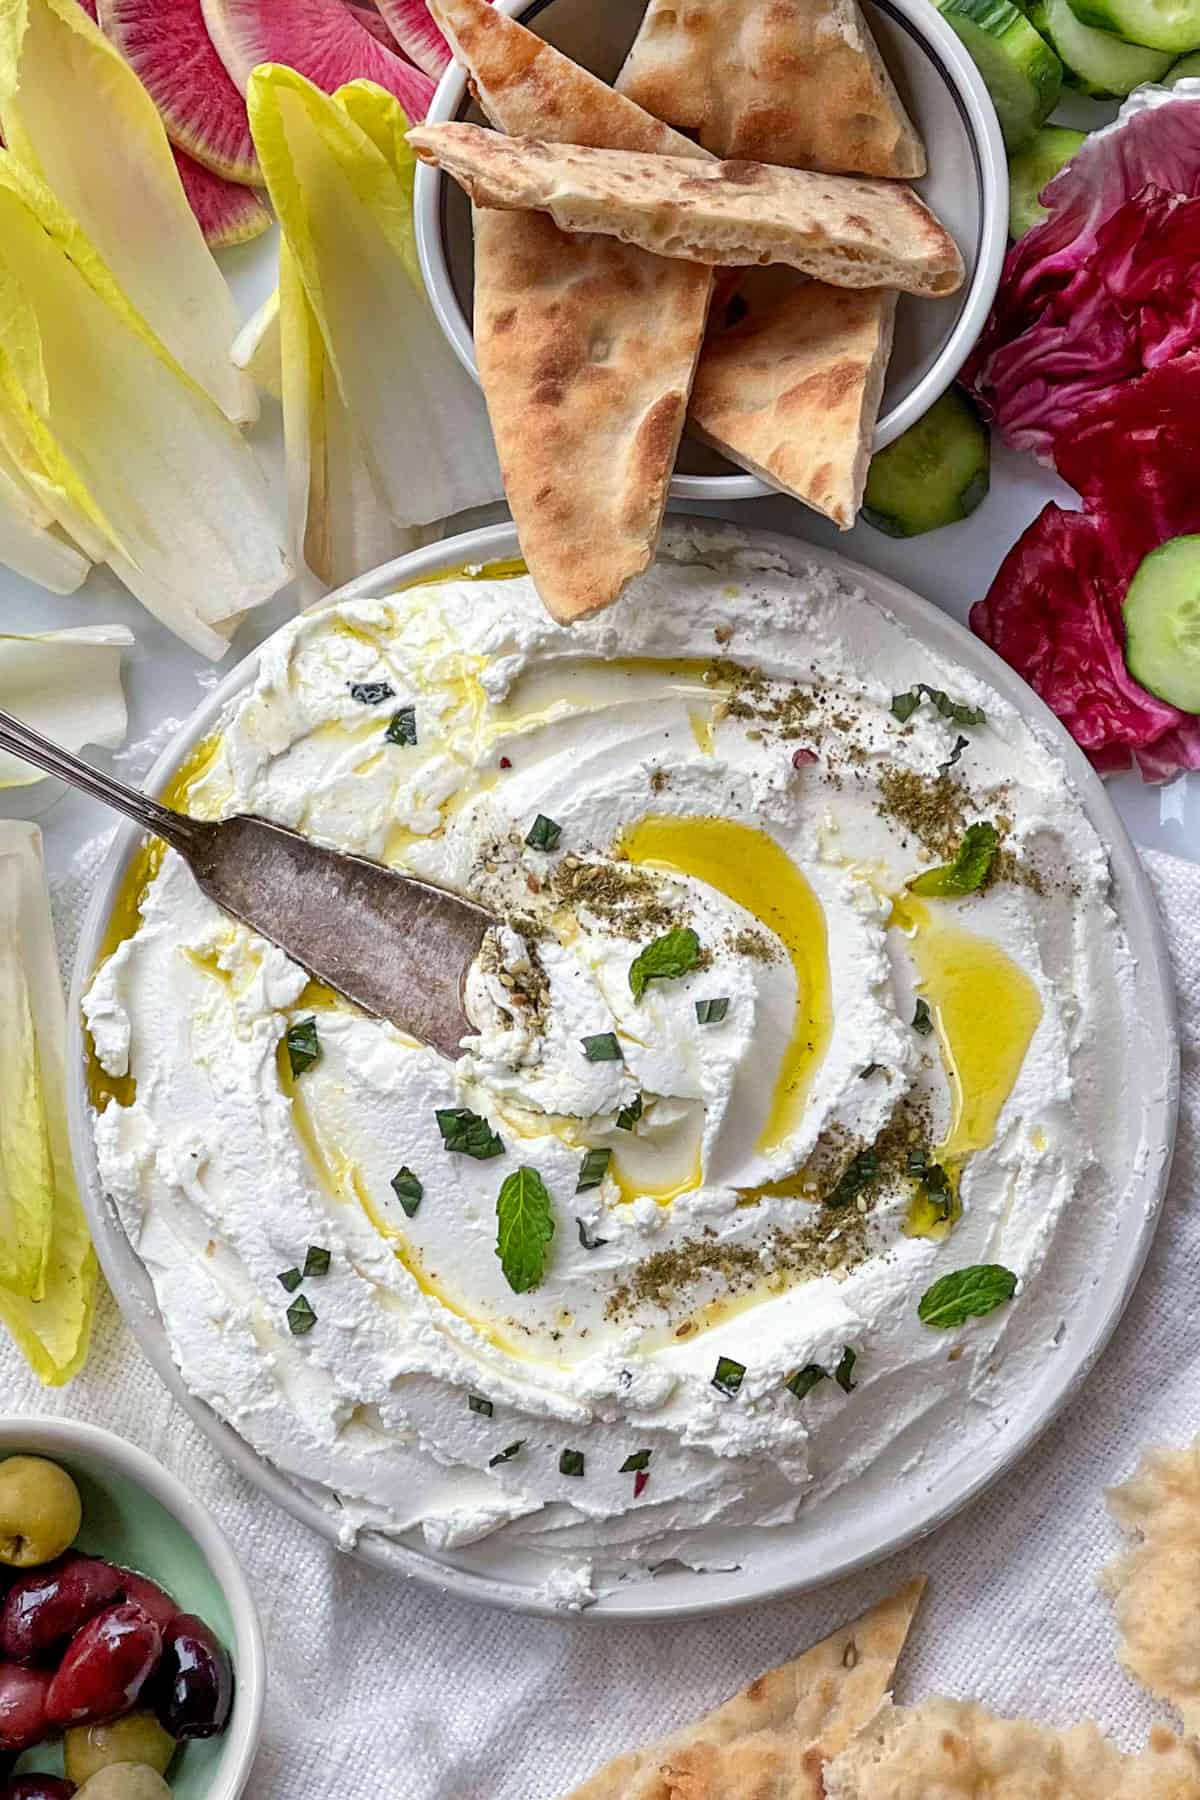 labneh dip on a plate with olive oil and mint and a knife surrounded by vegetables and pita